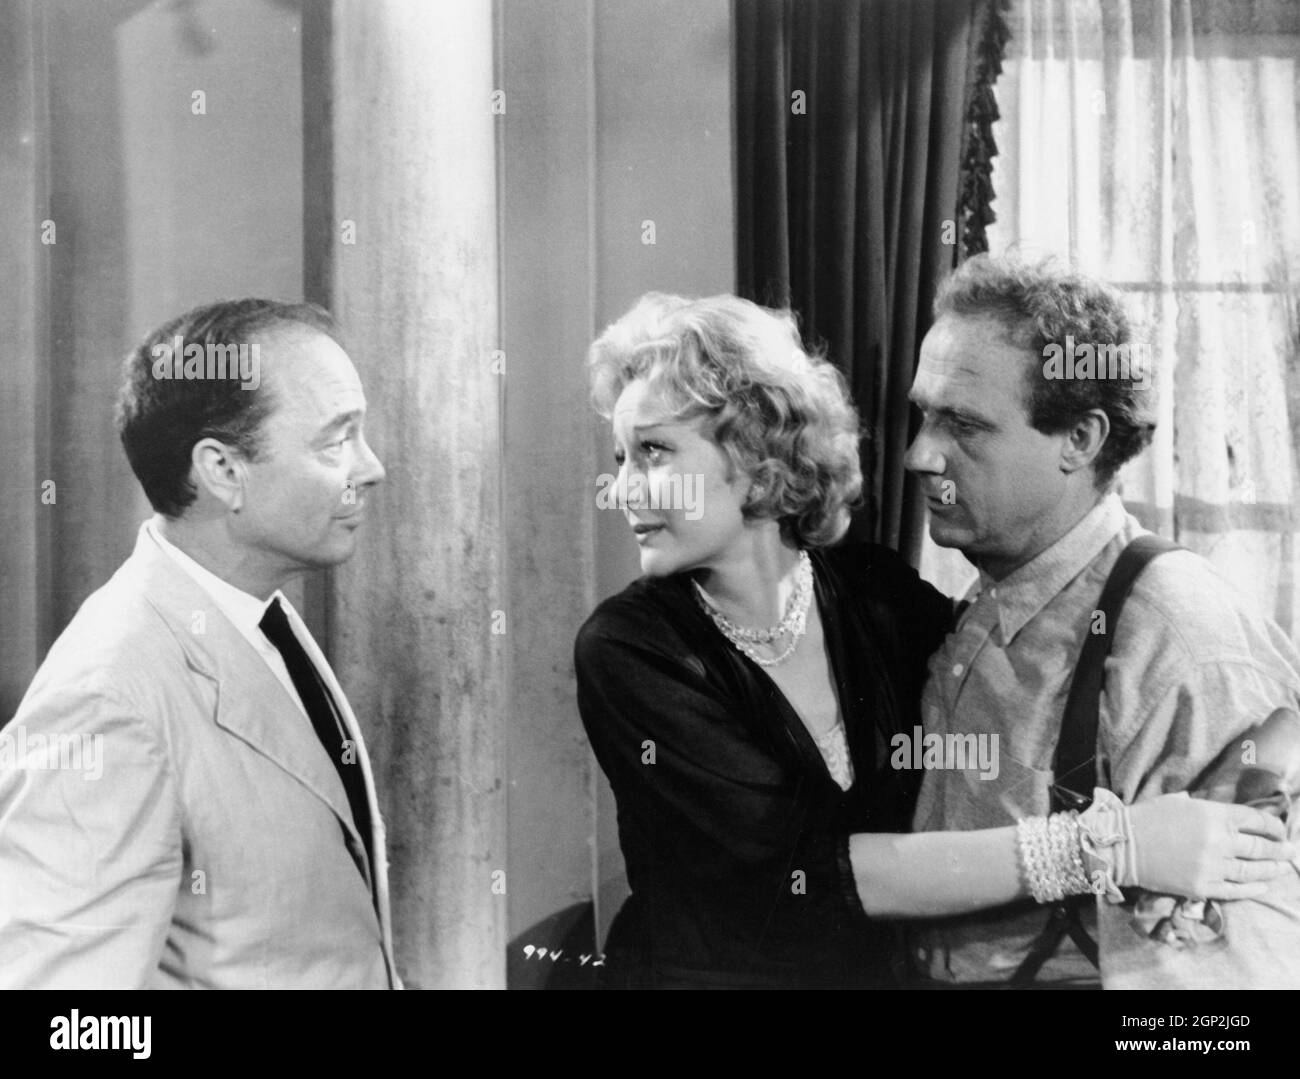 THE SOUND AND THE FURY, Yul Brynner, Margaret Leighton, Jack Warden ...